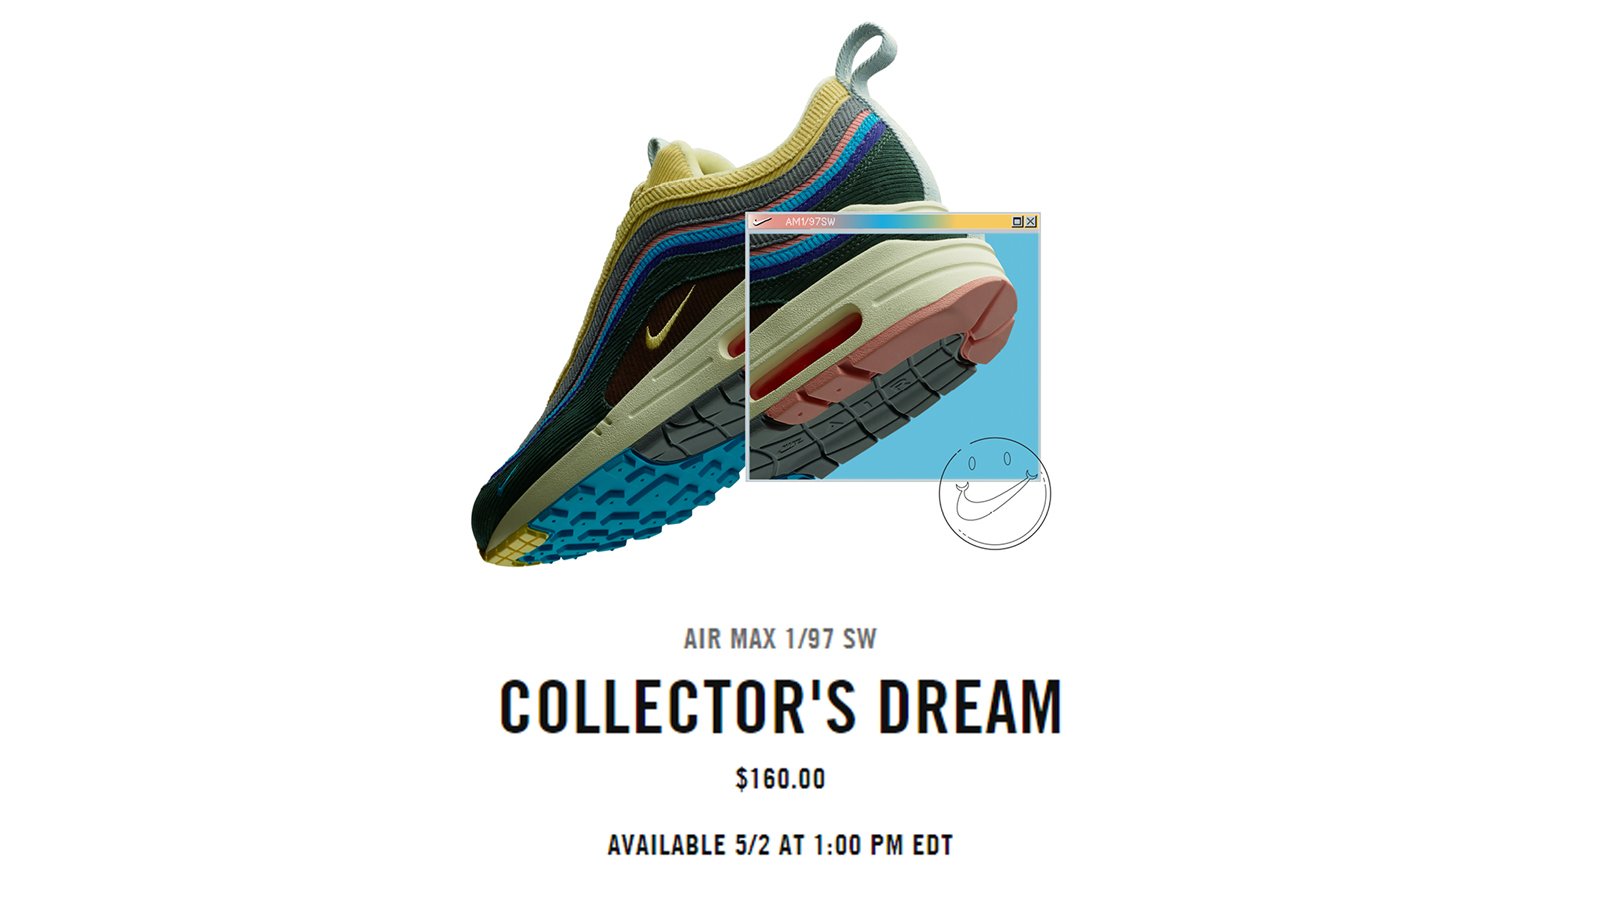 SOLELINKS on Twitter: "#RESTOCK May 02, 2018 1PM EST Sean Wotherspoon x Nike Air Max 1/97 VF 'Collector's Dream' =&gt; https://t.co/G0PzWiL0G2 https://t.co/Of0dvEy9UP" / Twitter